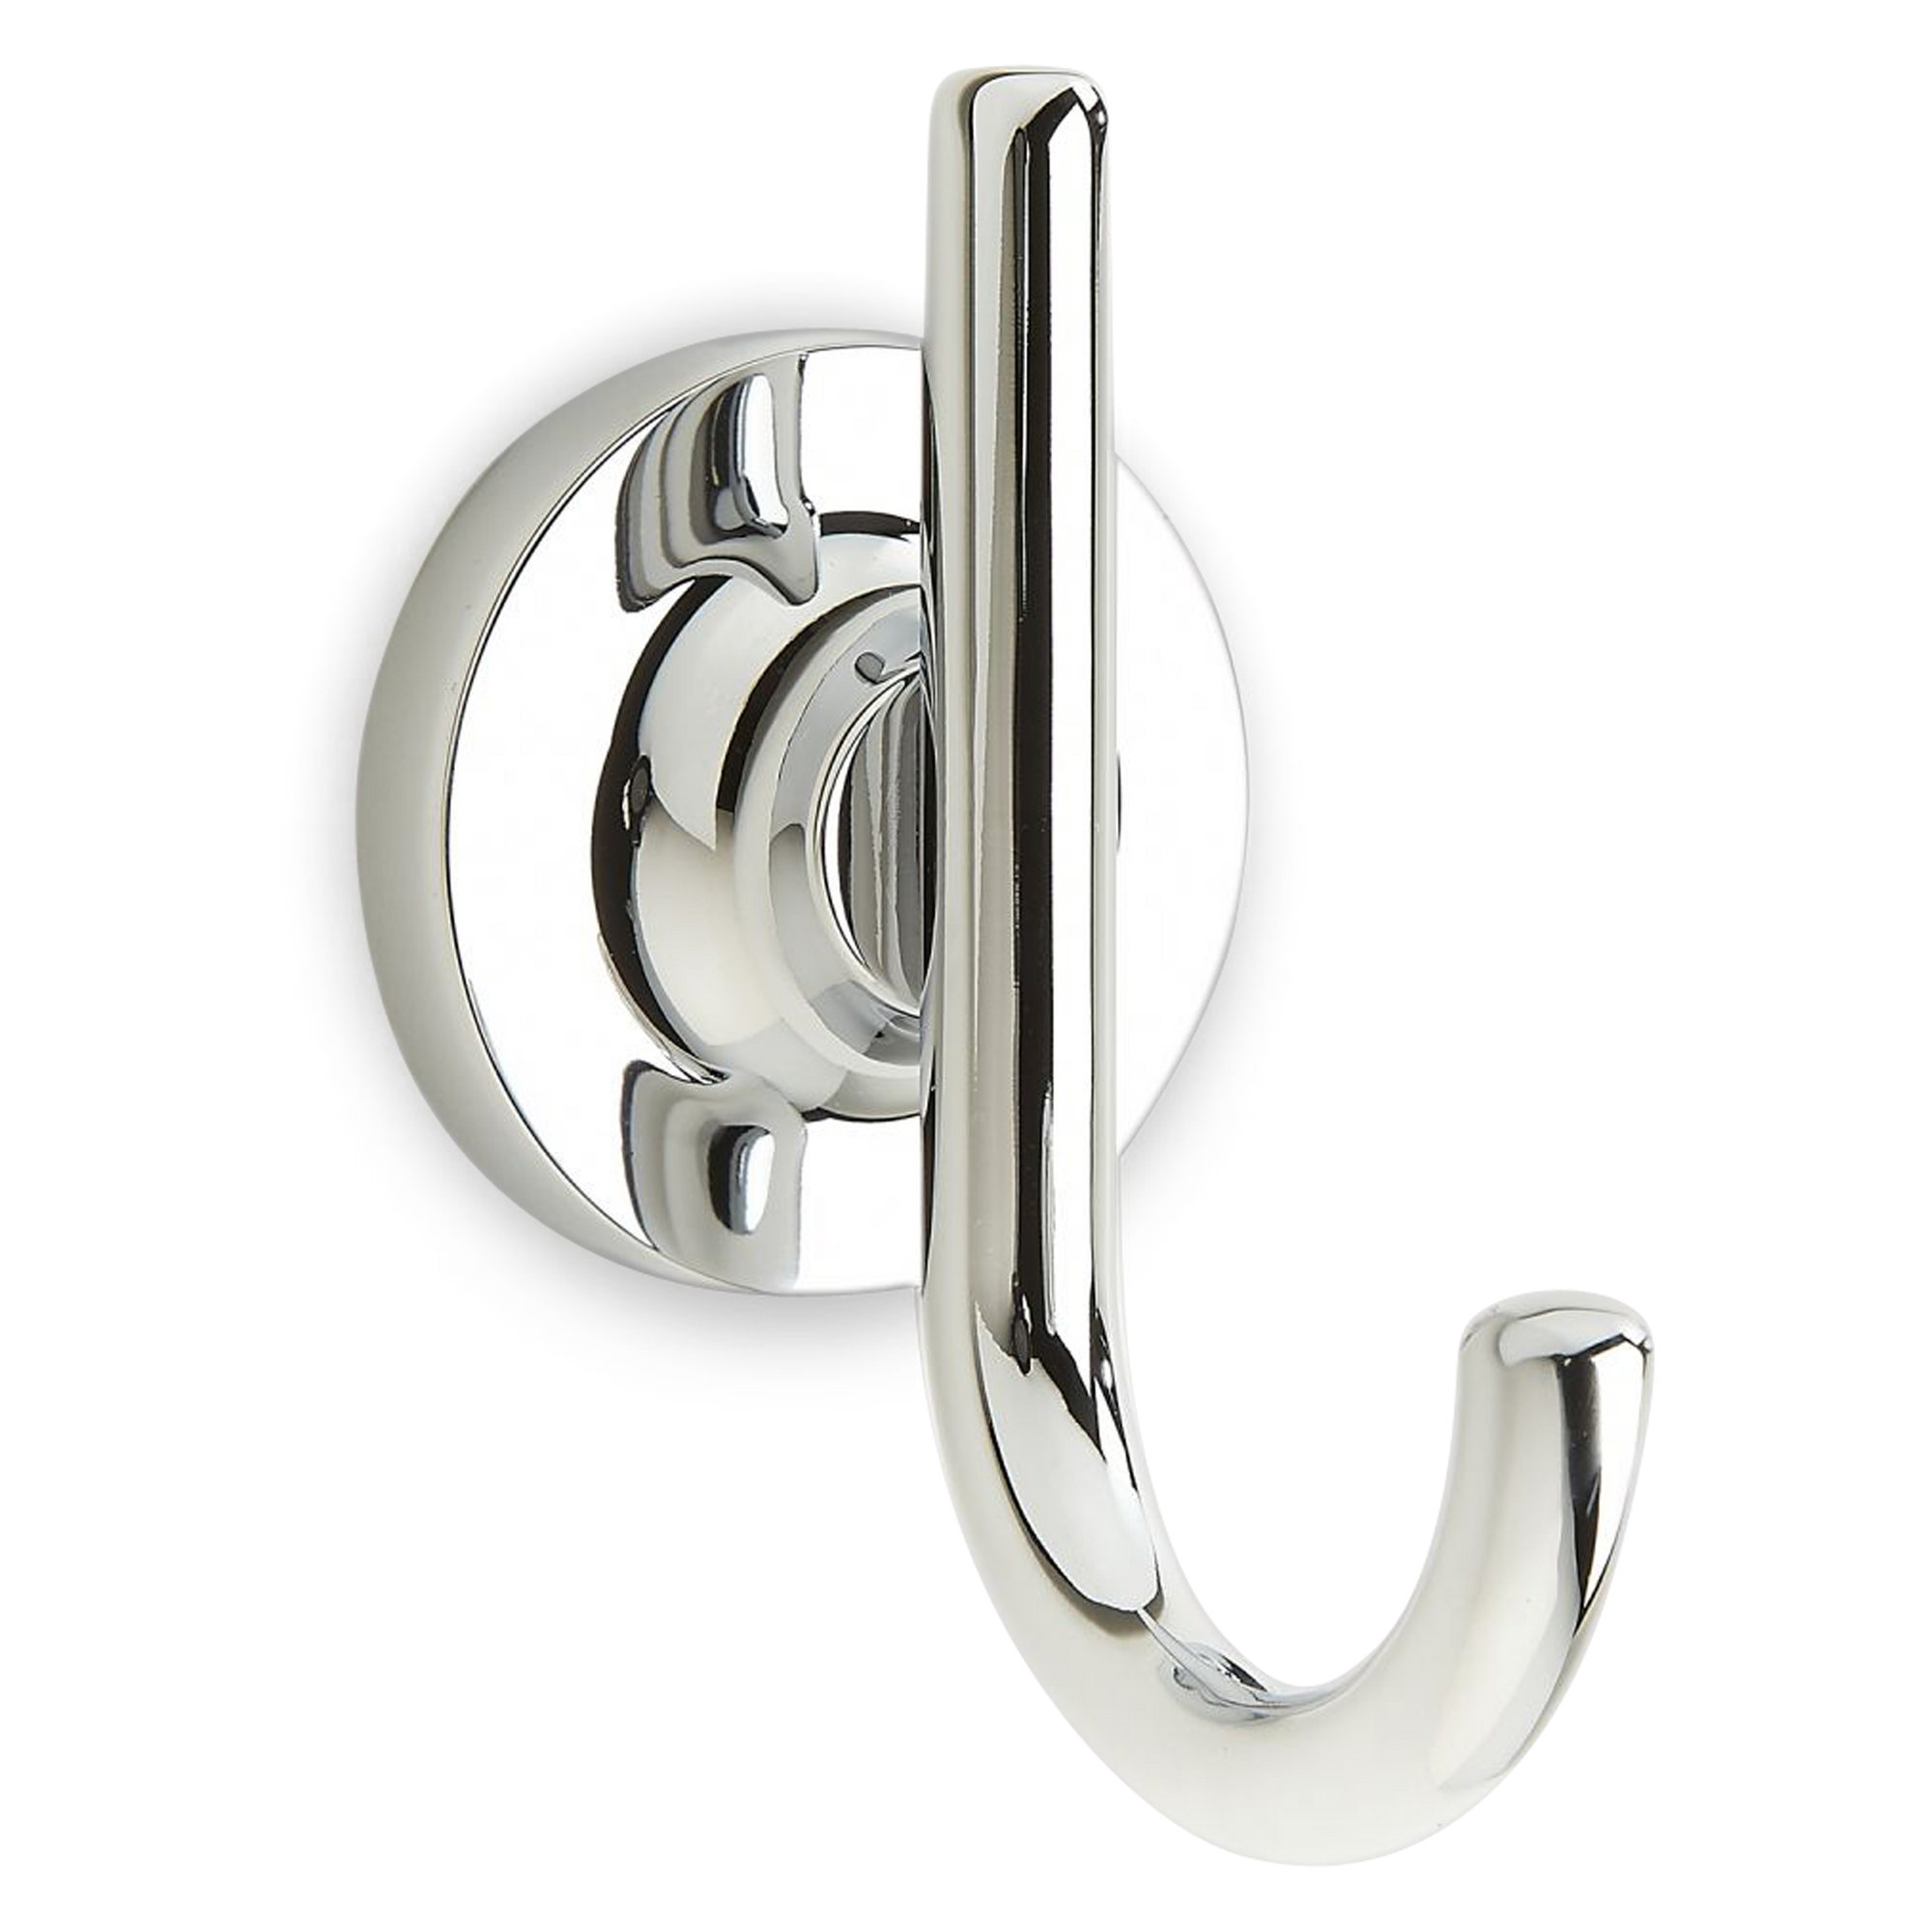 A magnificent, modern robe hook with a 